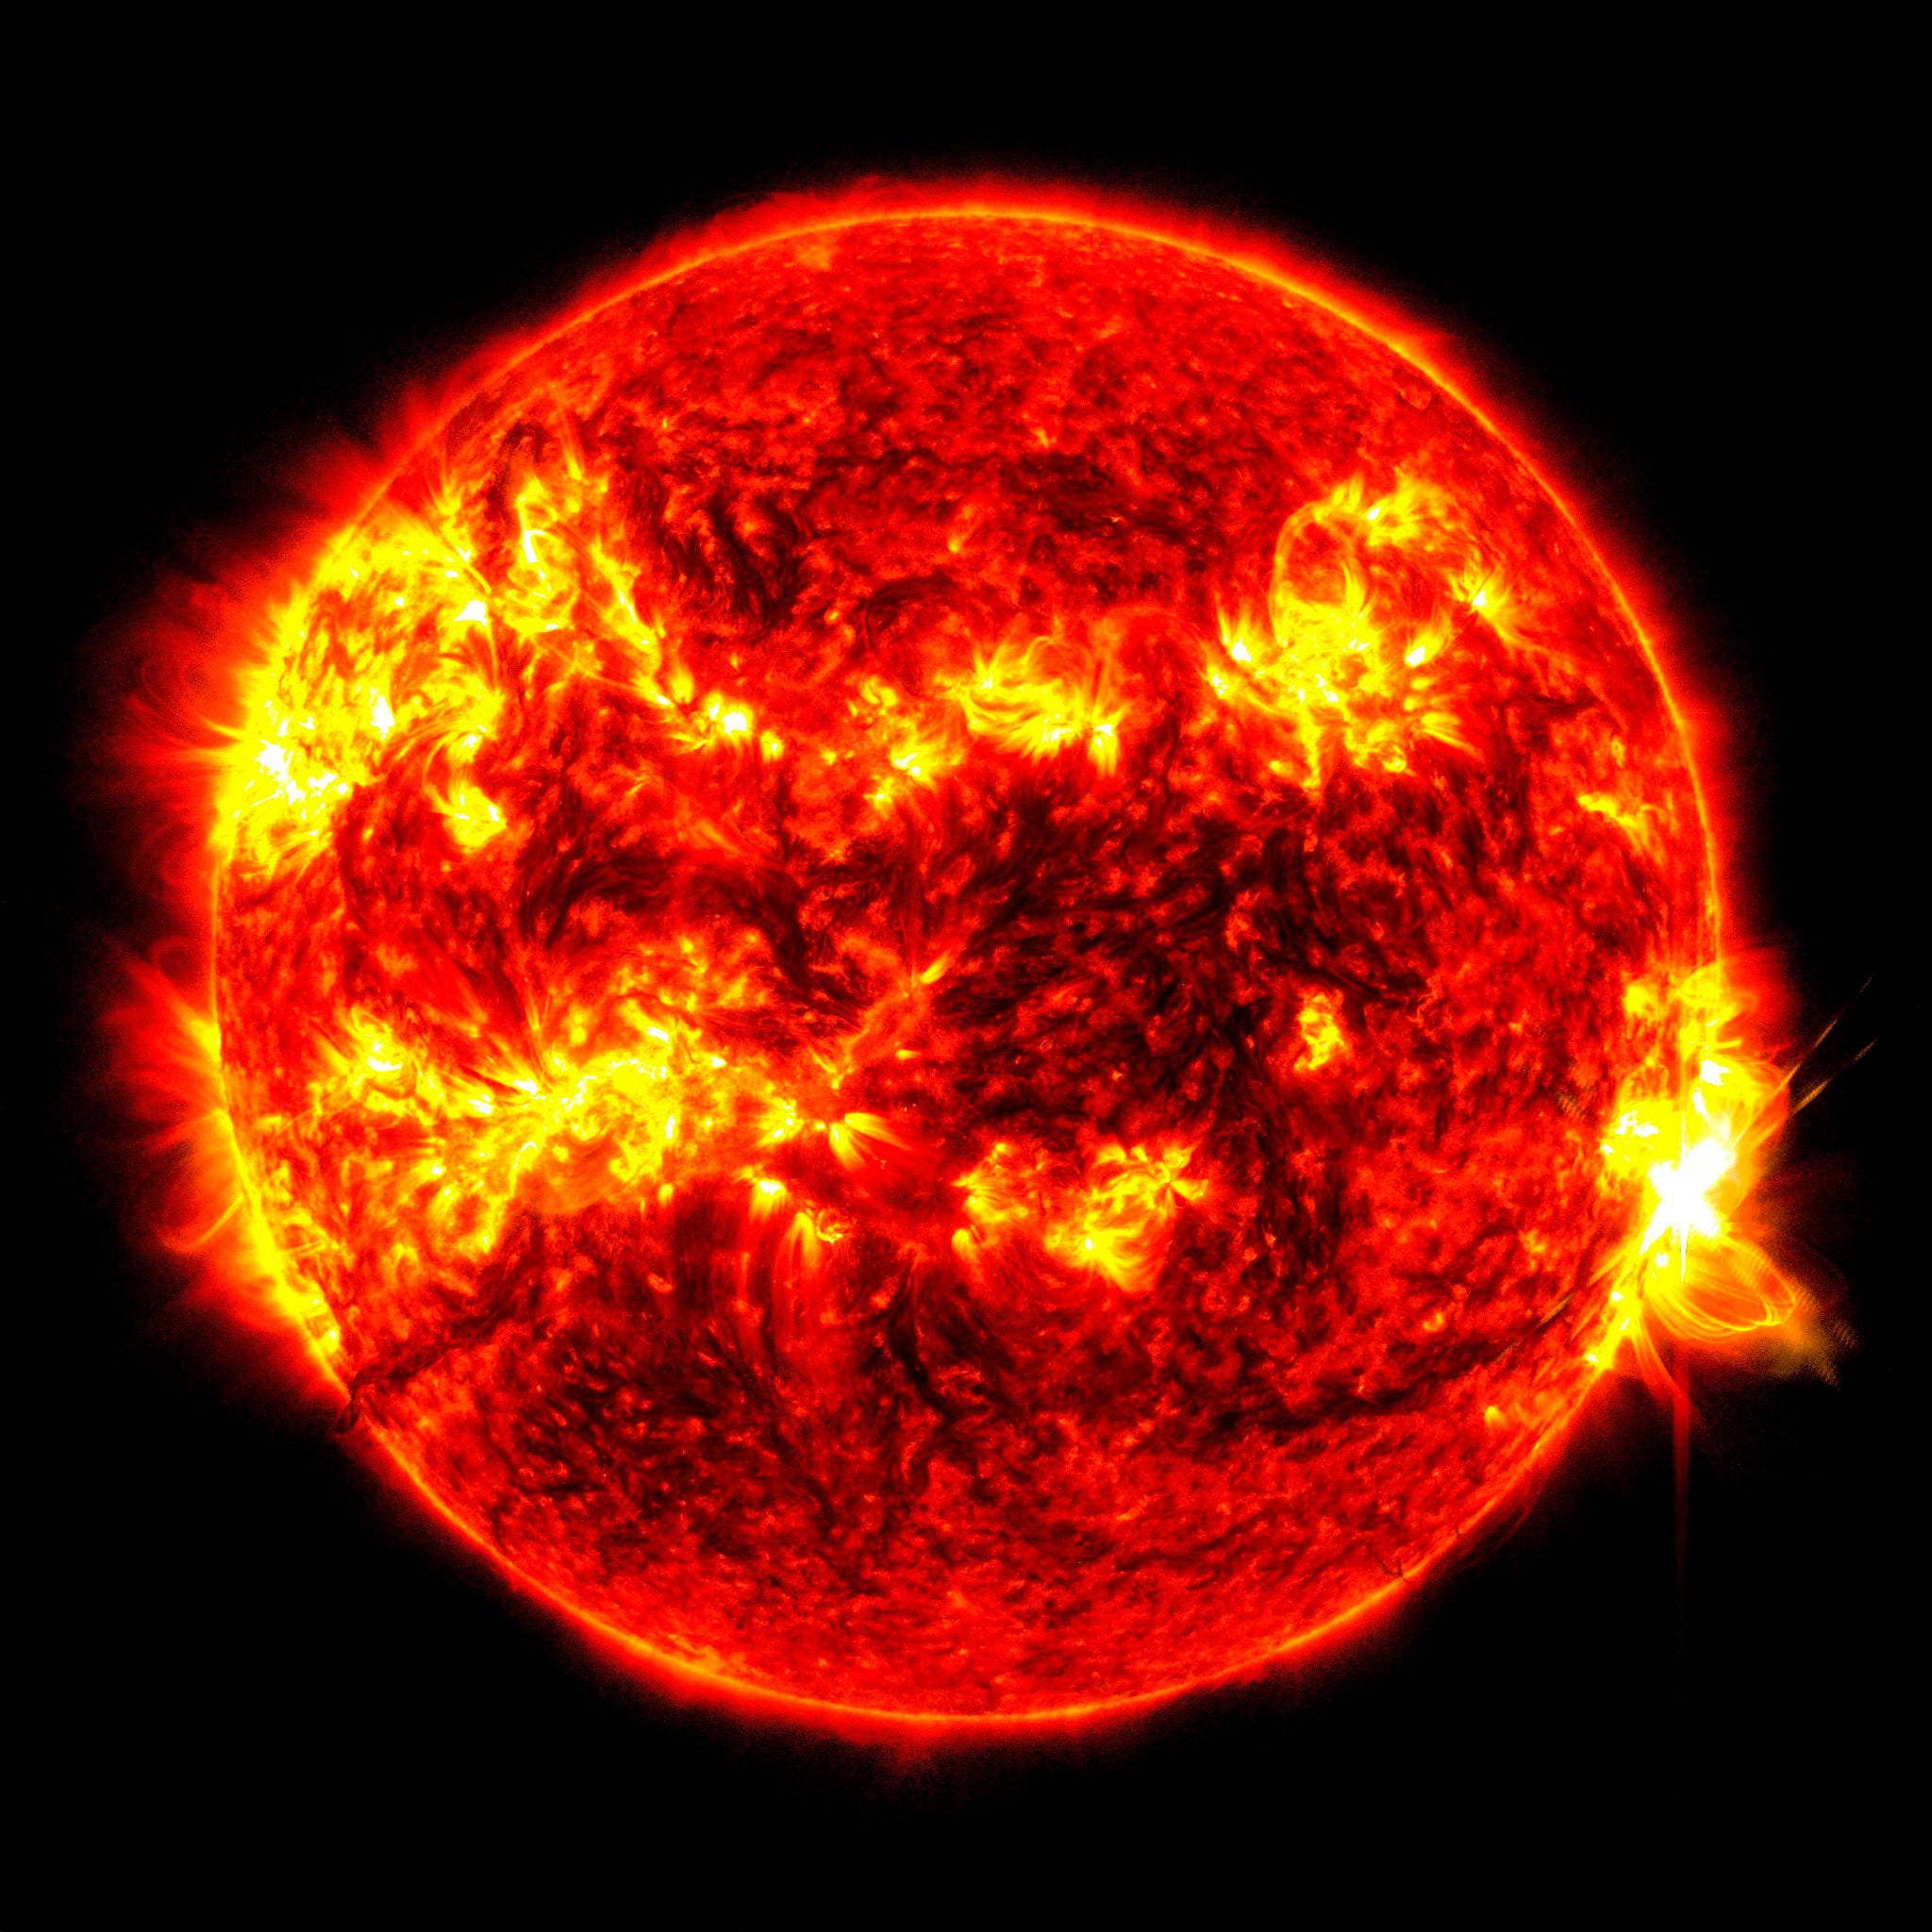 This image provided by Nasa’s Solar Dynamics Observatory shows a solar flare spewing from the right side of the Sun